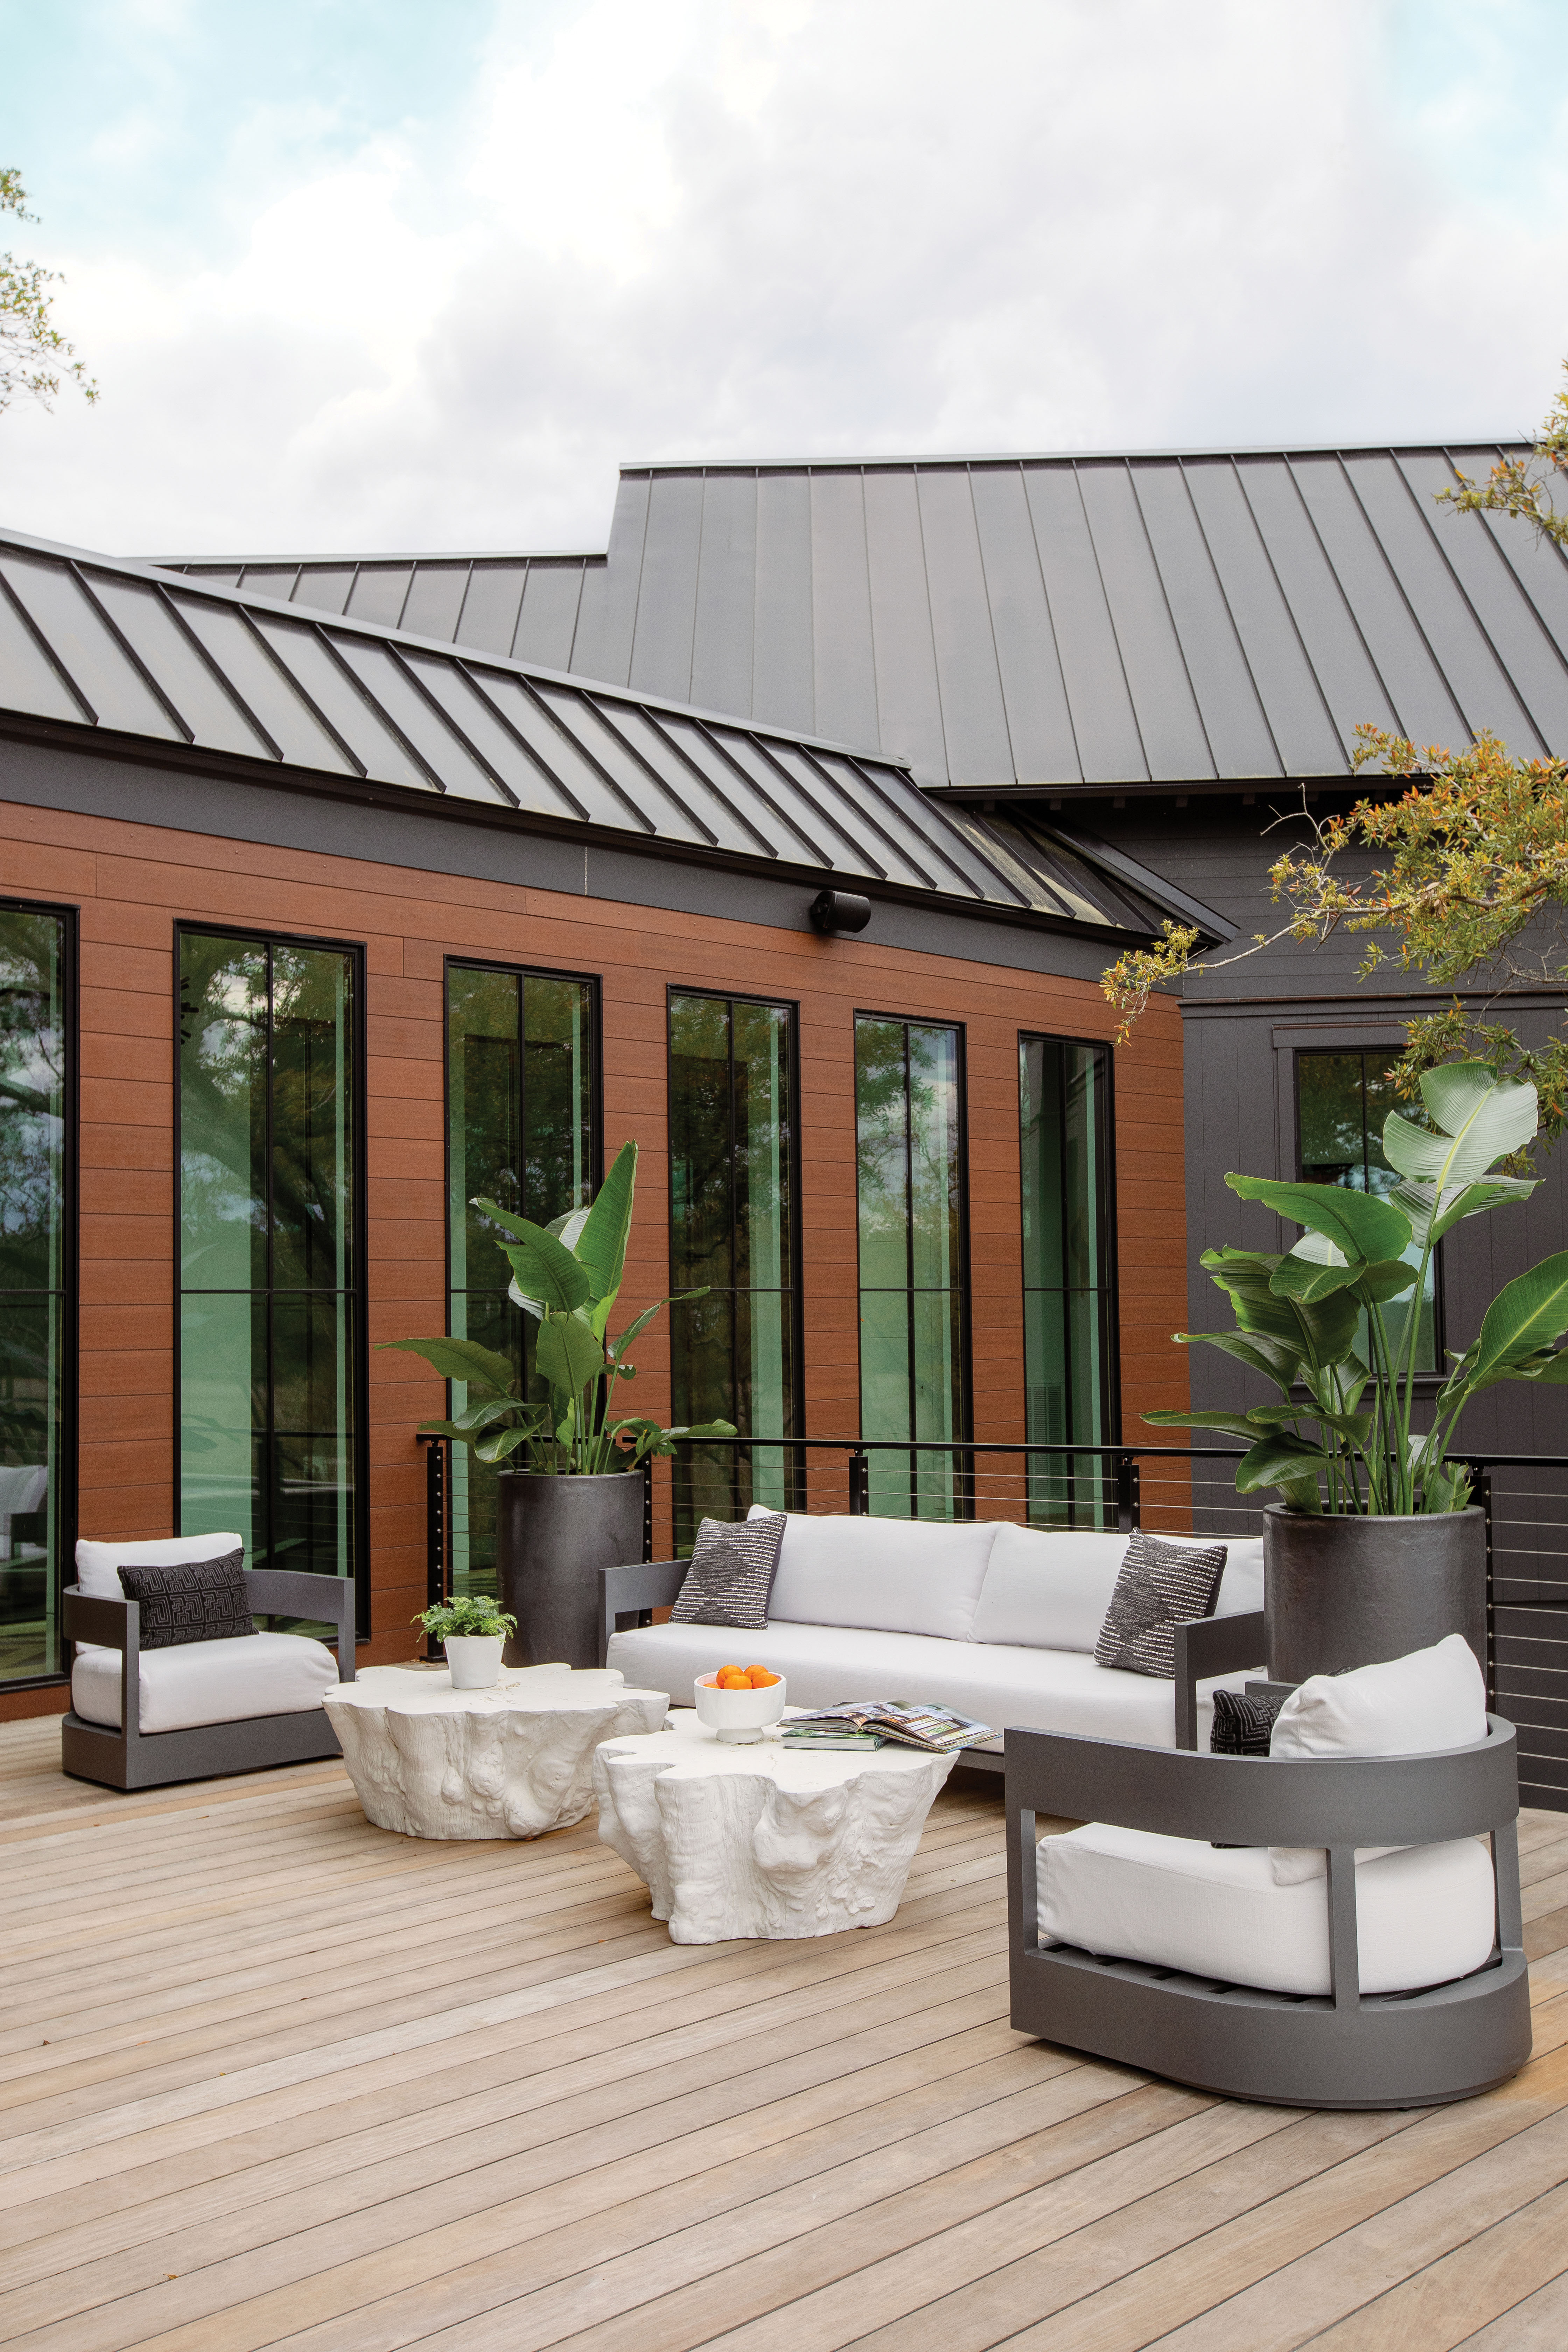 On Deck: Fiber cement siding that mimics the look of real wood with none of the maintenance issues brings warmth to the outdoor seating area, where Serena &amp; Lily “Boonville” coffee tables cast from real tree roots continue the organic look.